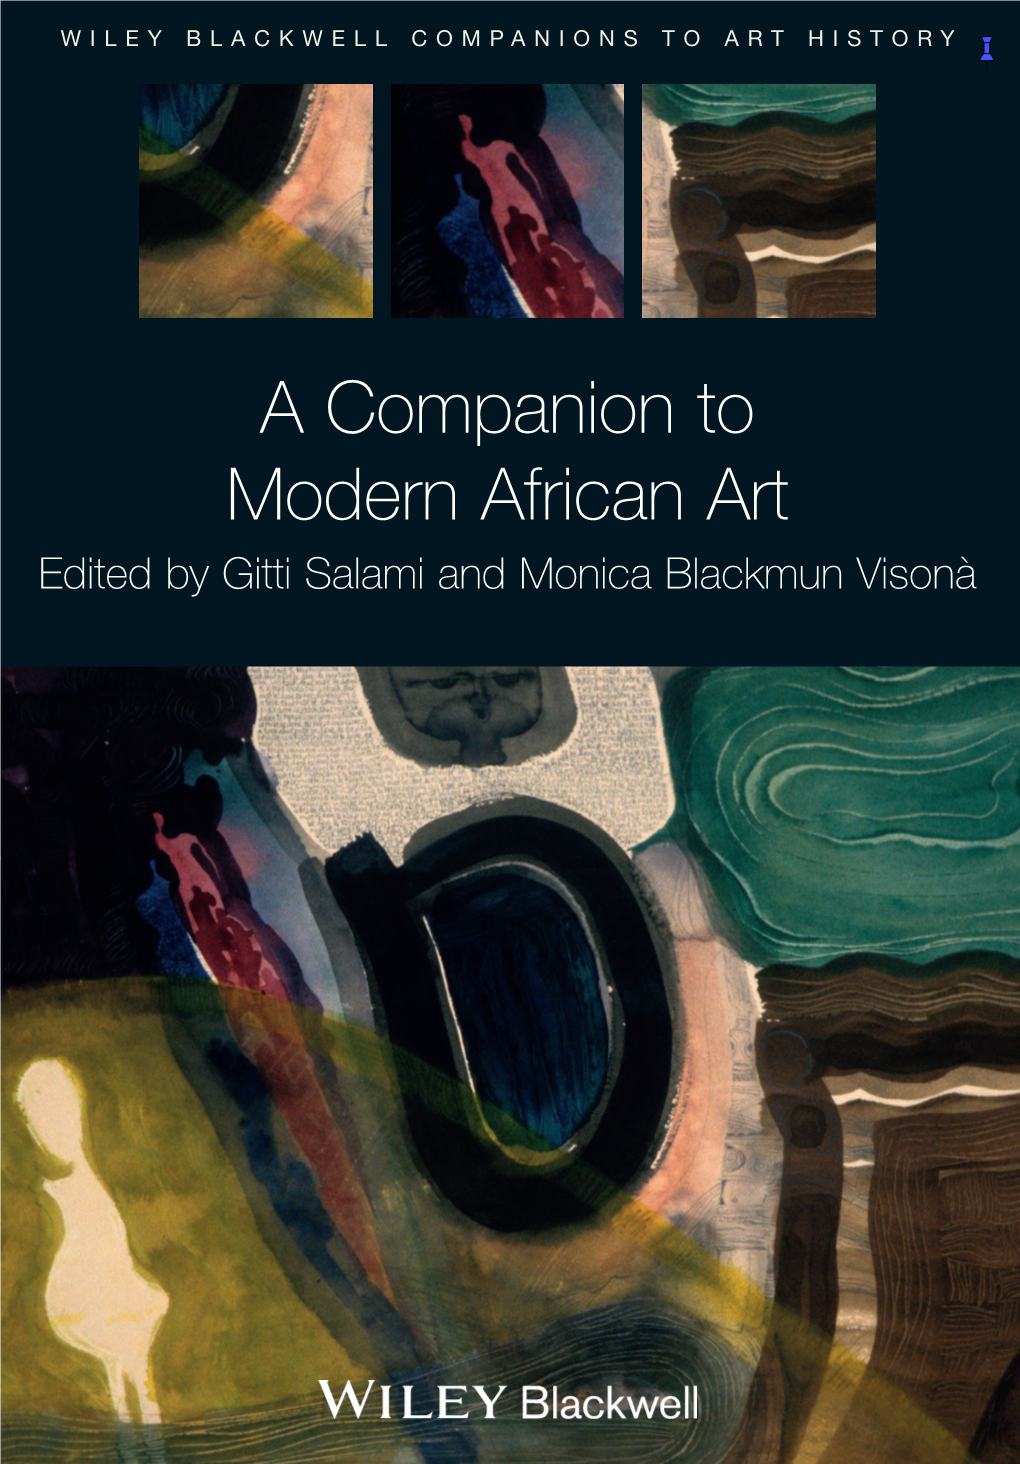 A Companion to Modern African Art WILEY BLACKWELL COMPANIONS to ART HISTORY